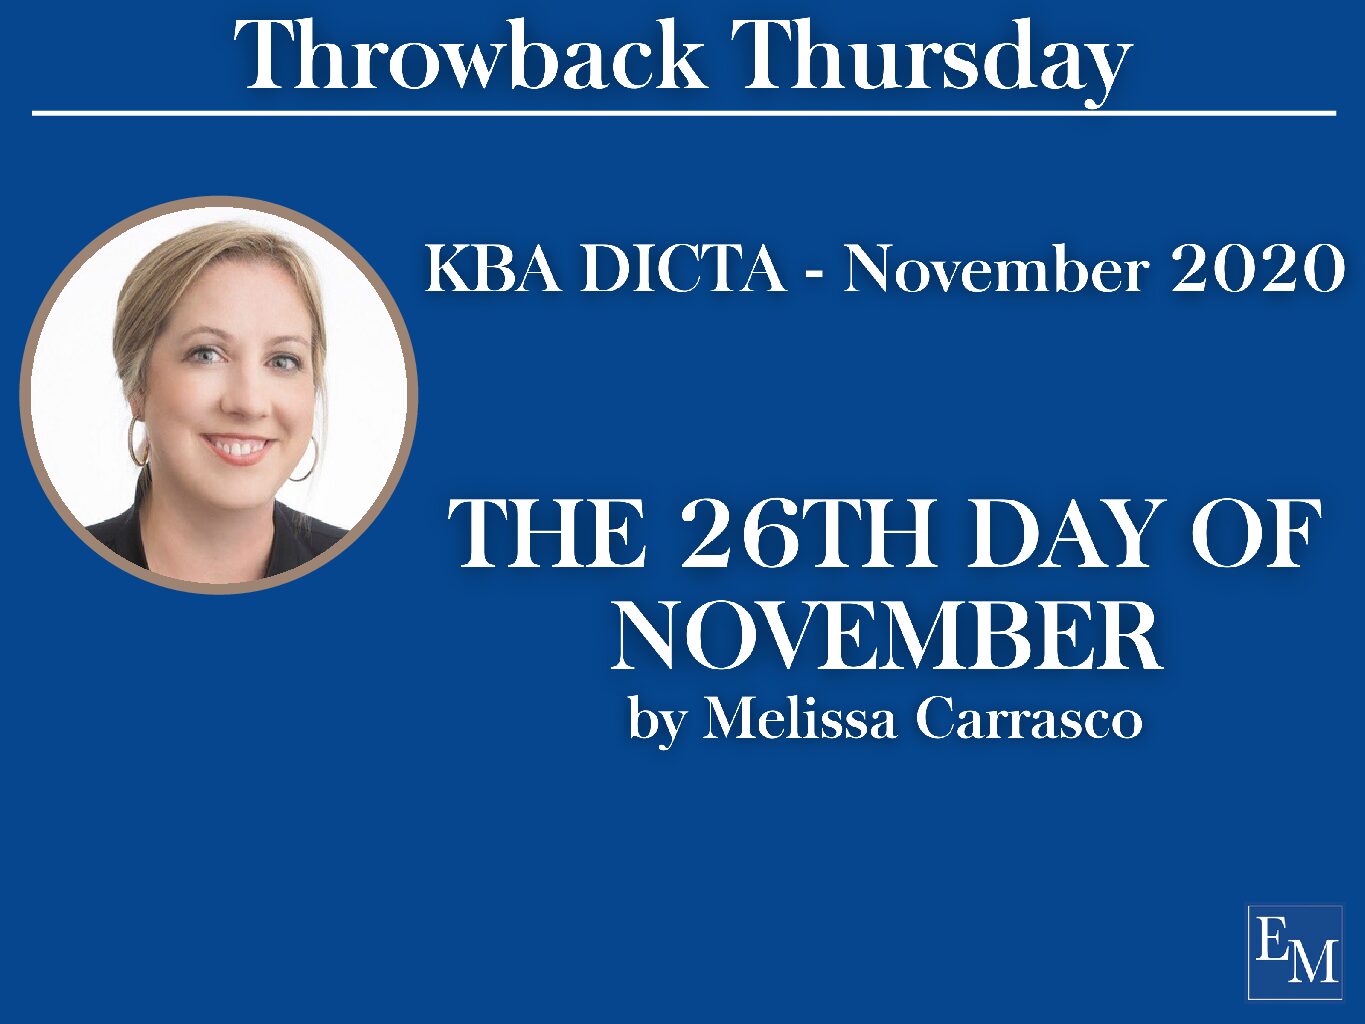 Throwback Thursday – THE 26TH DAY OF NOVEMBER by Melissa Carrasco